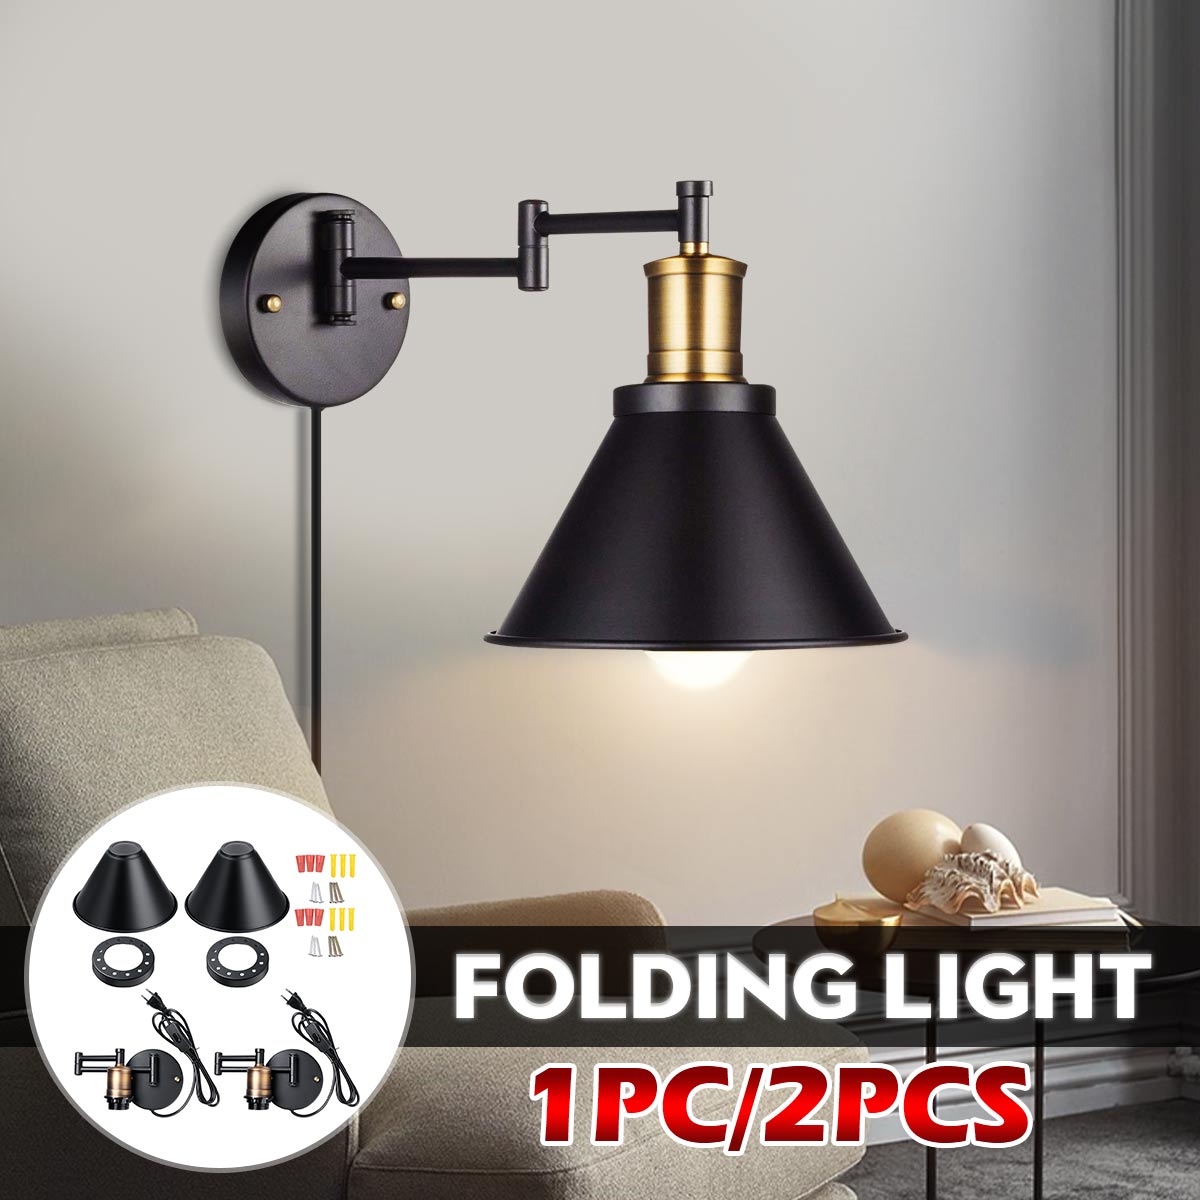 12Pcs-220V-Adjustable-LED-Wall-Light-Lampshade-Lamp-Cover-Holder-Fixture-Dinning-Room-Without-Bulb-1797094-2